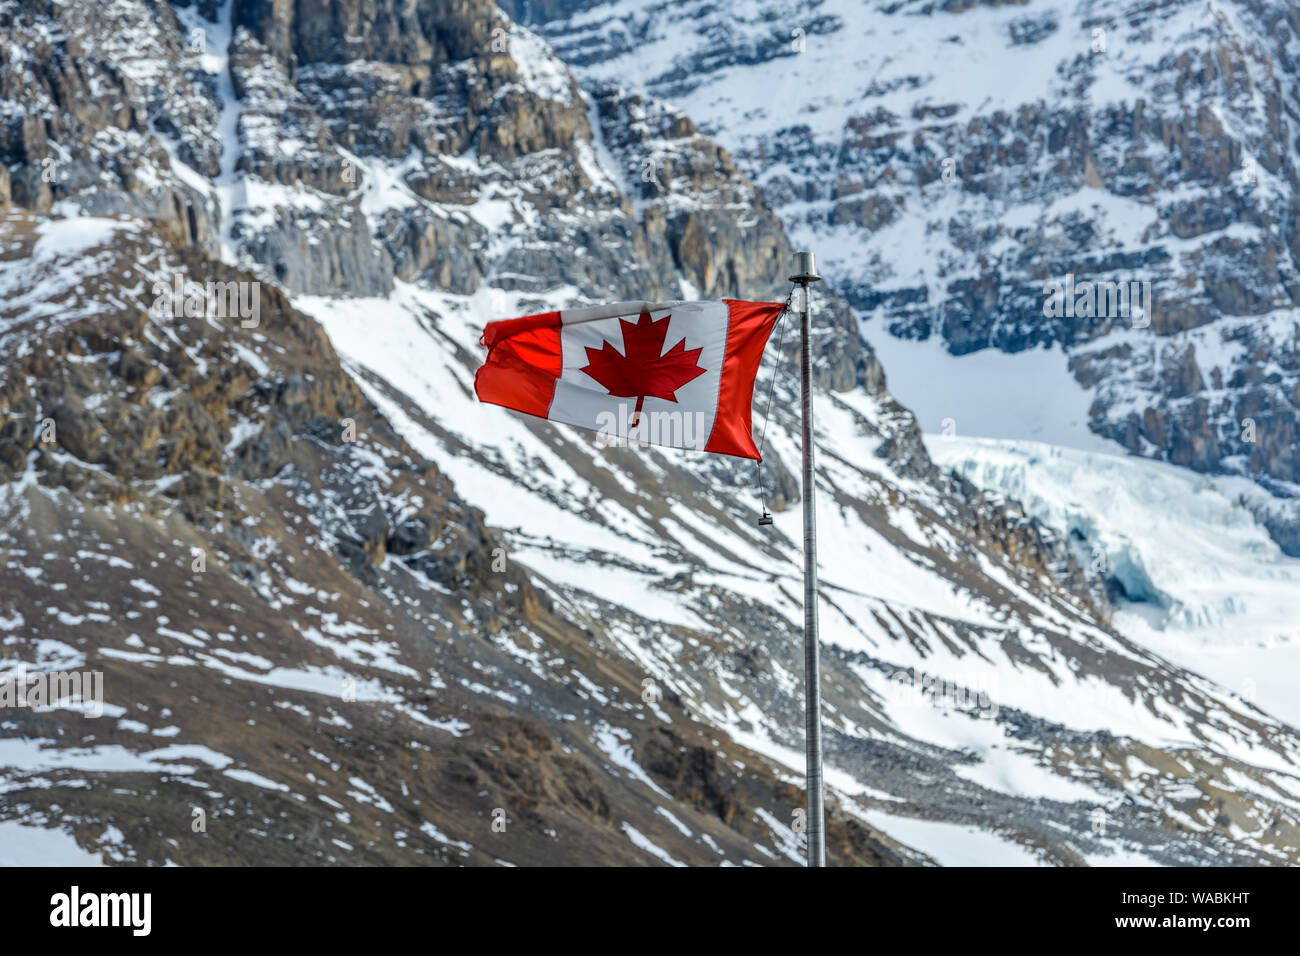 Snow Mountains - A Canadian Maple Leaf National Flag flying at front of snow-covered rocky mountain slopes, Jasper National Park, Alberta, Canada. Stock Photo